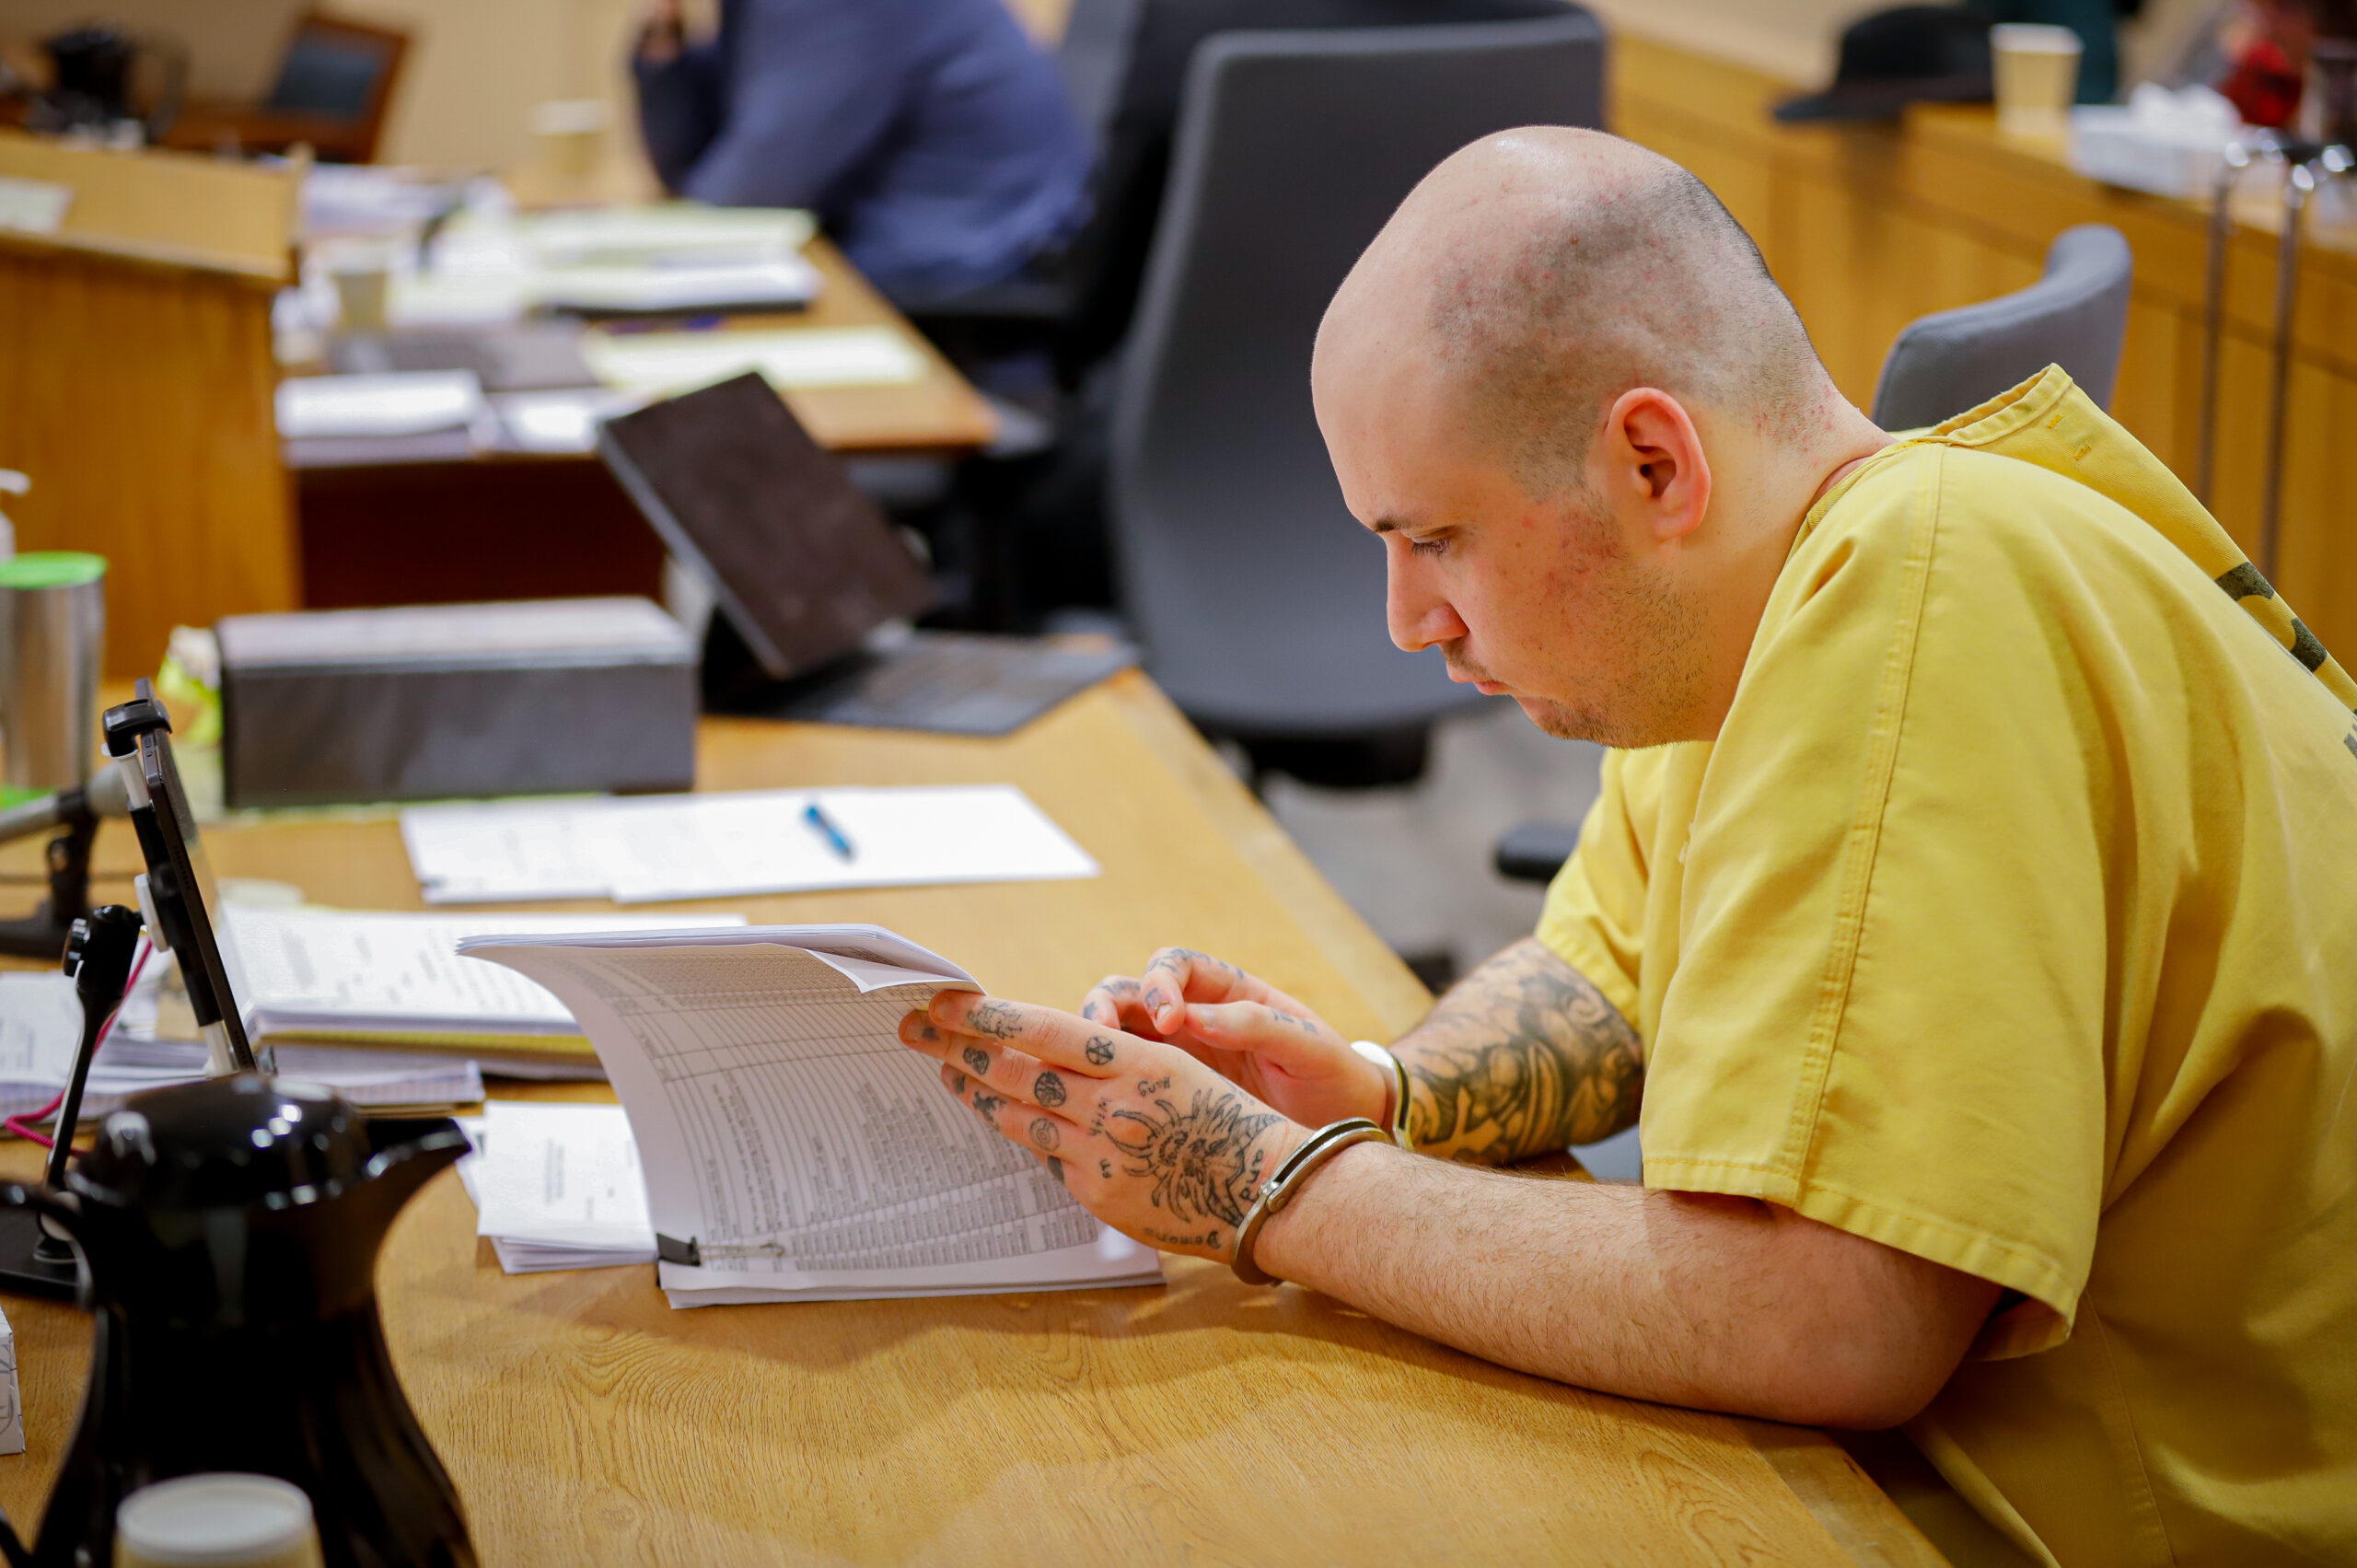 A man in a yellow prison jumper looks through documents